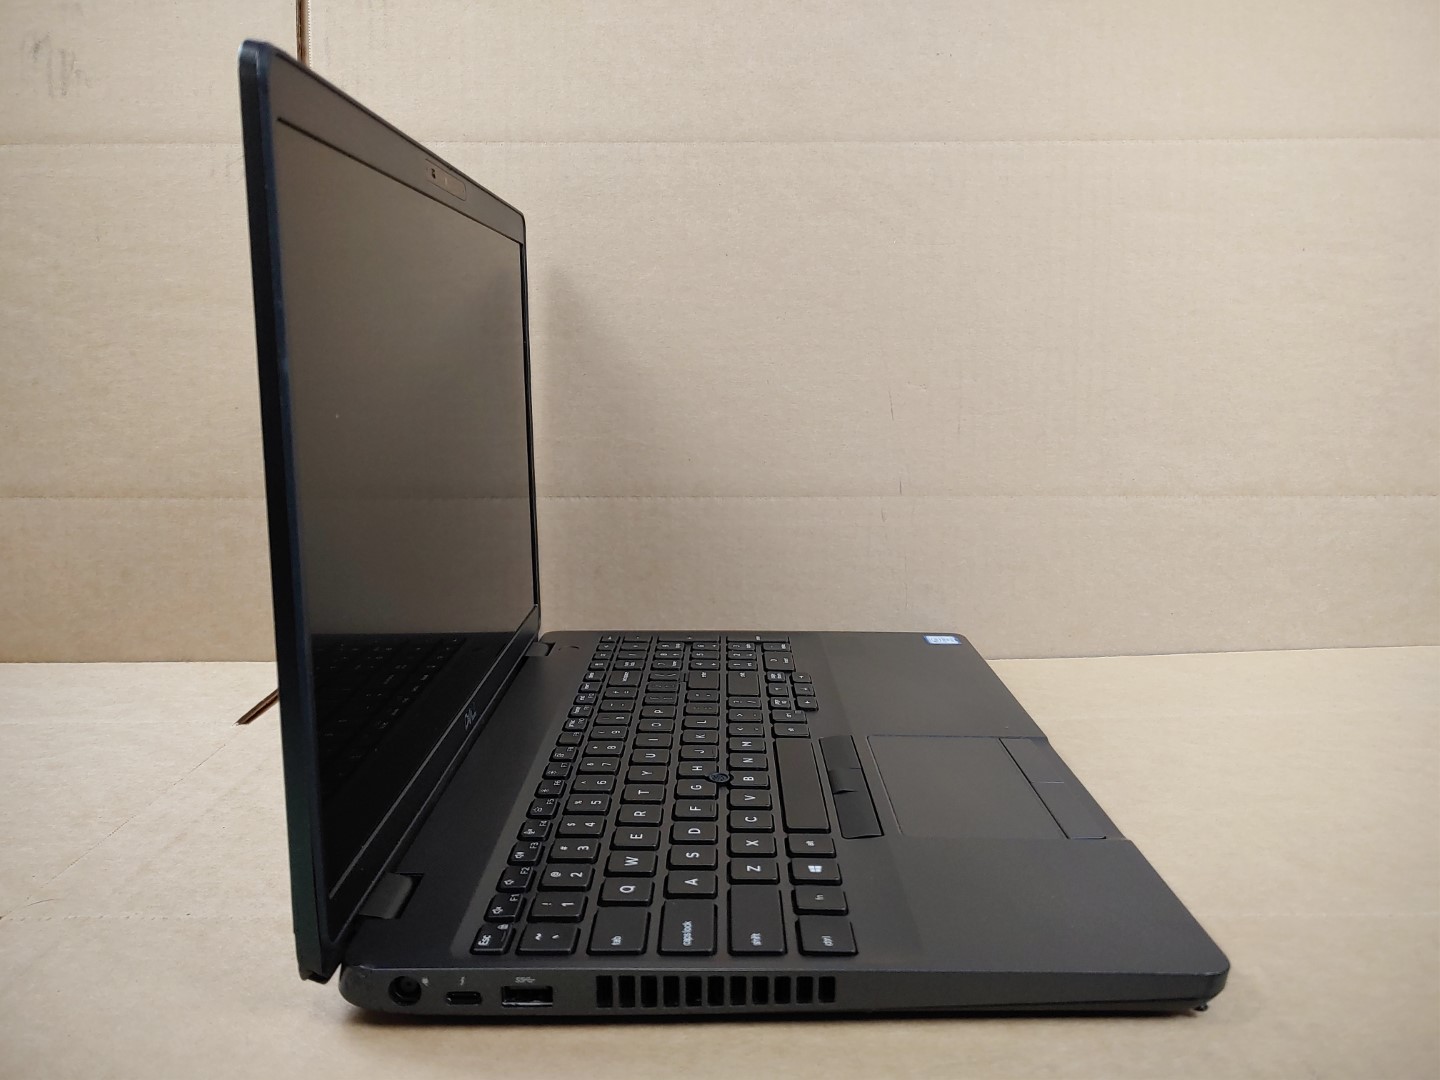 we have added actual images to this listing of the Dell Latitude you would receive. **NO POWER ADAPTER / NO SSD or HDD/ NO OS**Item Specifics: MPN : Precision 3540UPC : N/AType : LaptopBrand : DellProduct Line : PrecisionModel : Precision 3540Operating System : N/AScreen Size : 15.6-inchProcessor Type : Intel Core i7-8665U 8th GenProcessor Speed : 1.90GHzGraphics Processing Type : Intel(R) UHD GraphicsMemory : 8GBHard Drive Capacity : N/A - 1